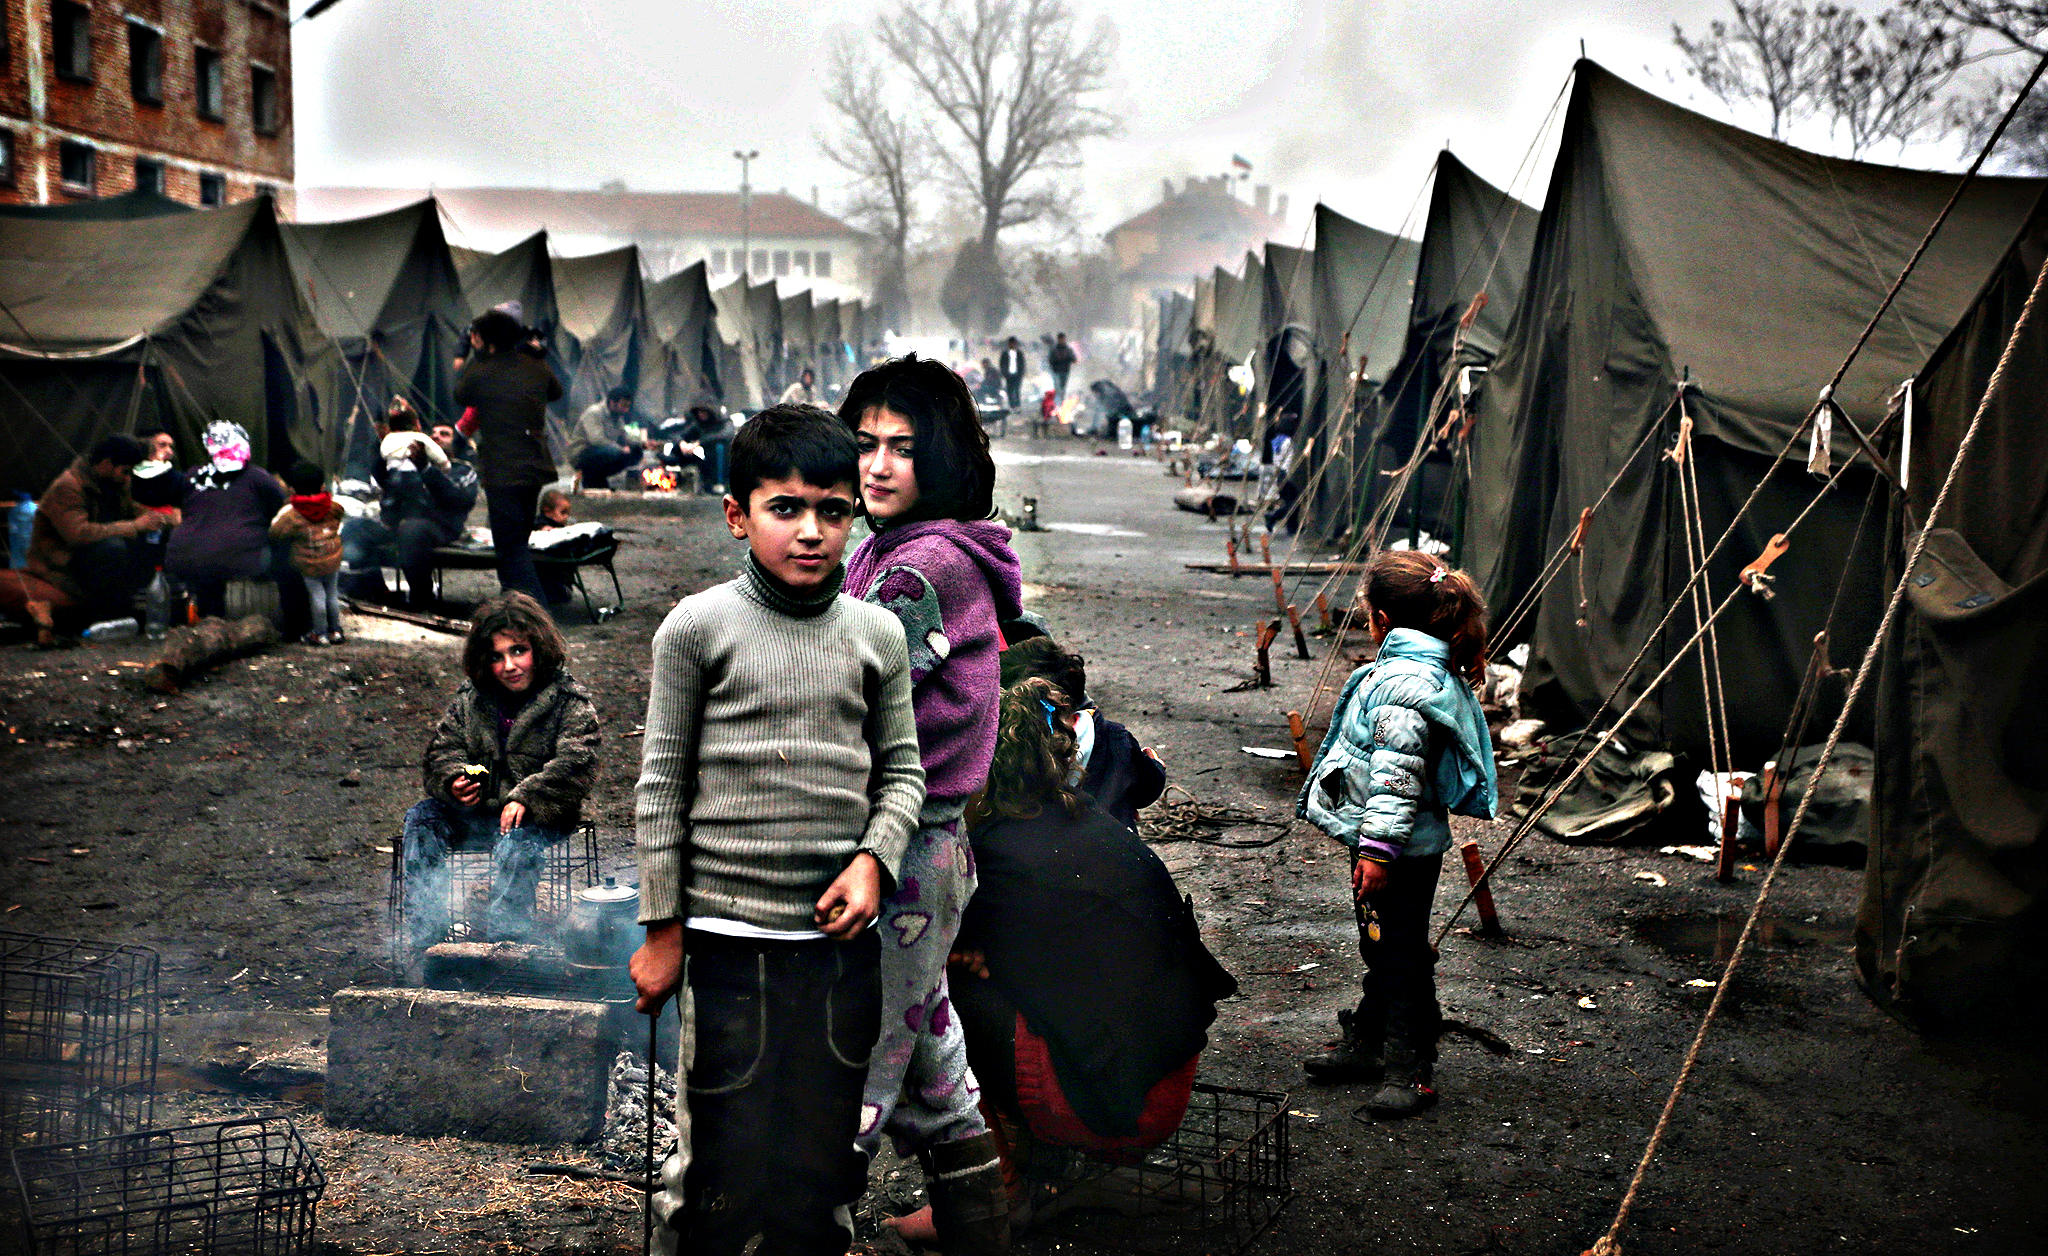 Syrian children try to stay warm near an open fire in front of their unheated tents in a refugee camp in the town of Harmanli, Bulgaria, Thursday, Nov. 21, 2013. Thousands of Syrian and other refugees from the Middle East, Asia and Africa, who find enough courage to make a dangerous journey from their war-ravaged states, often end up in the crammed settlements in the Balkans, including Bulgaria, Greece or Serbia, after being caught on the borders of wealthy Western European nations for attempting to cross illegally.